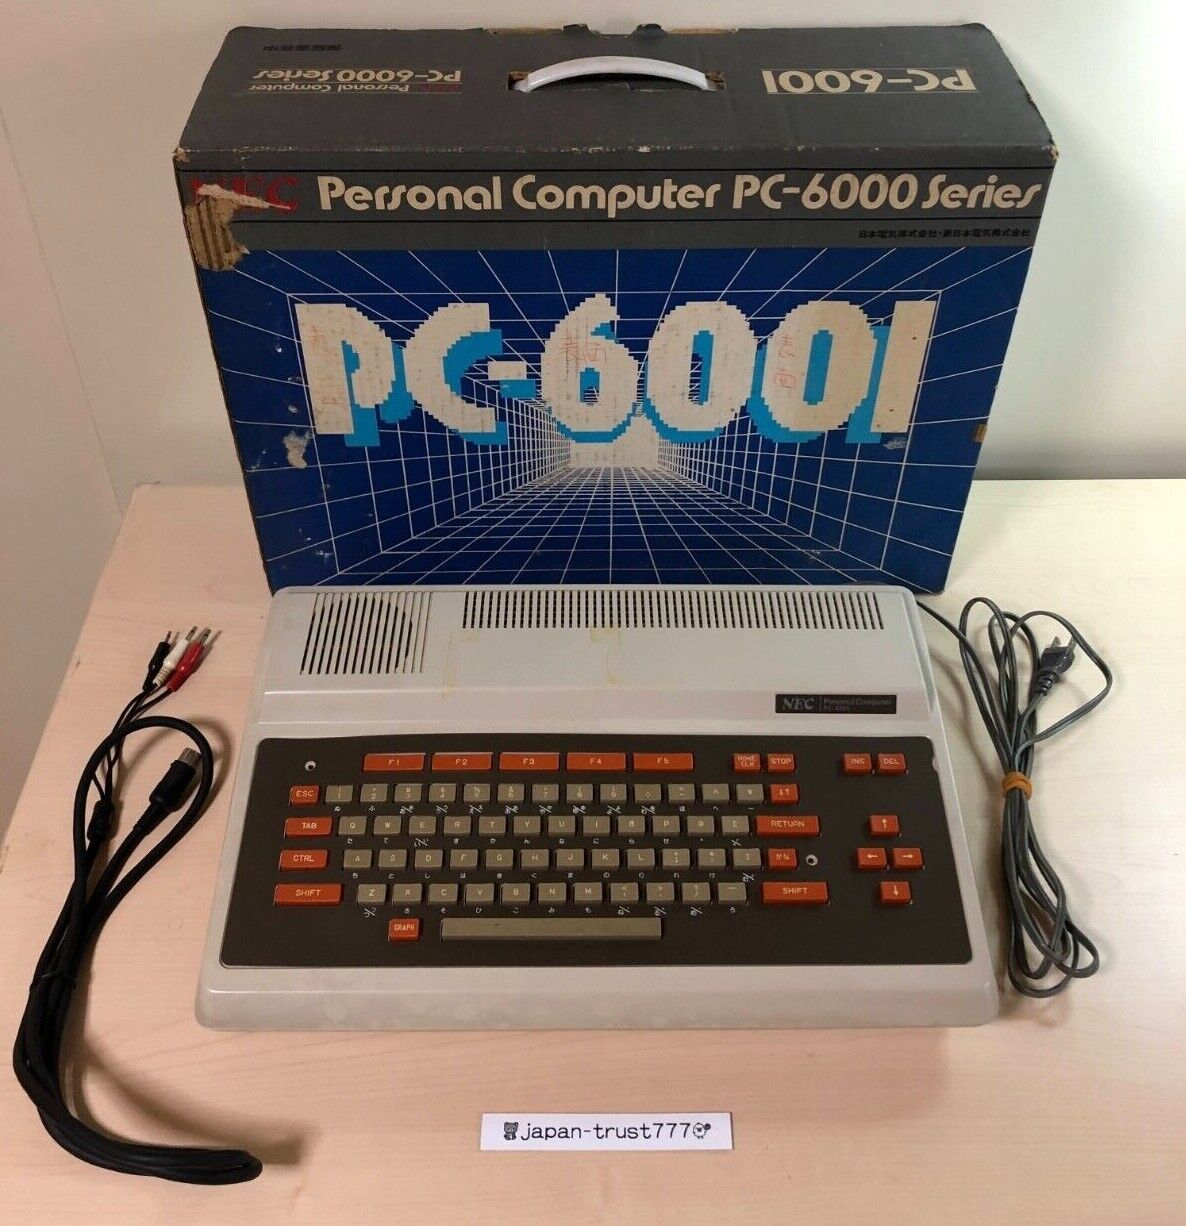 NEC PC-6001 Personal Computer Japanese Model in Box Vintage Junk For Parts